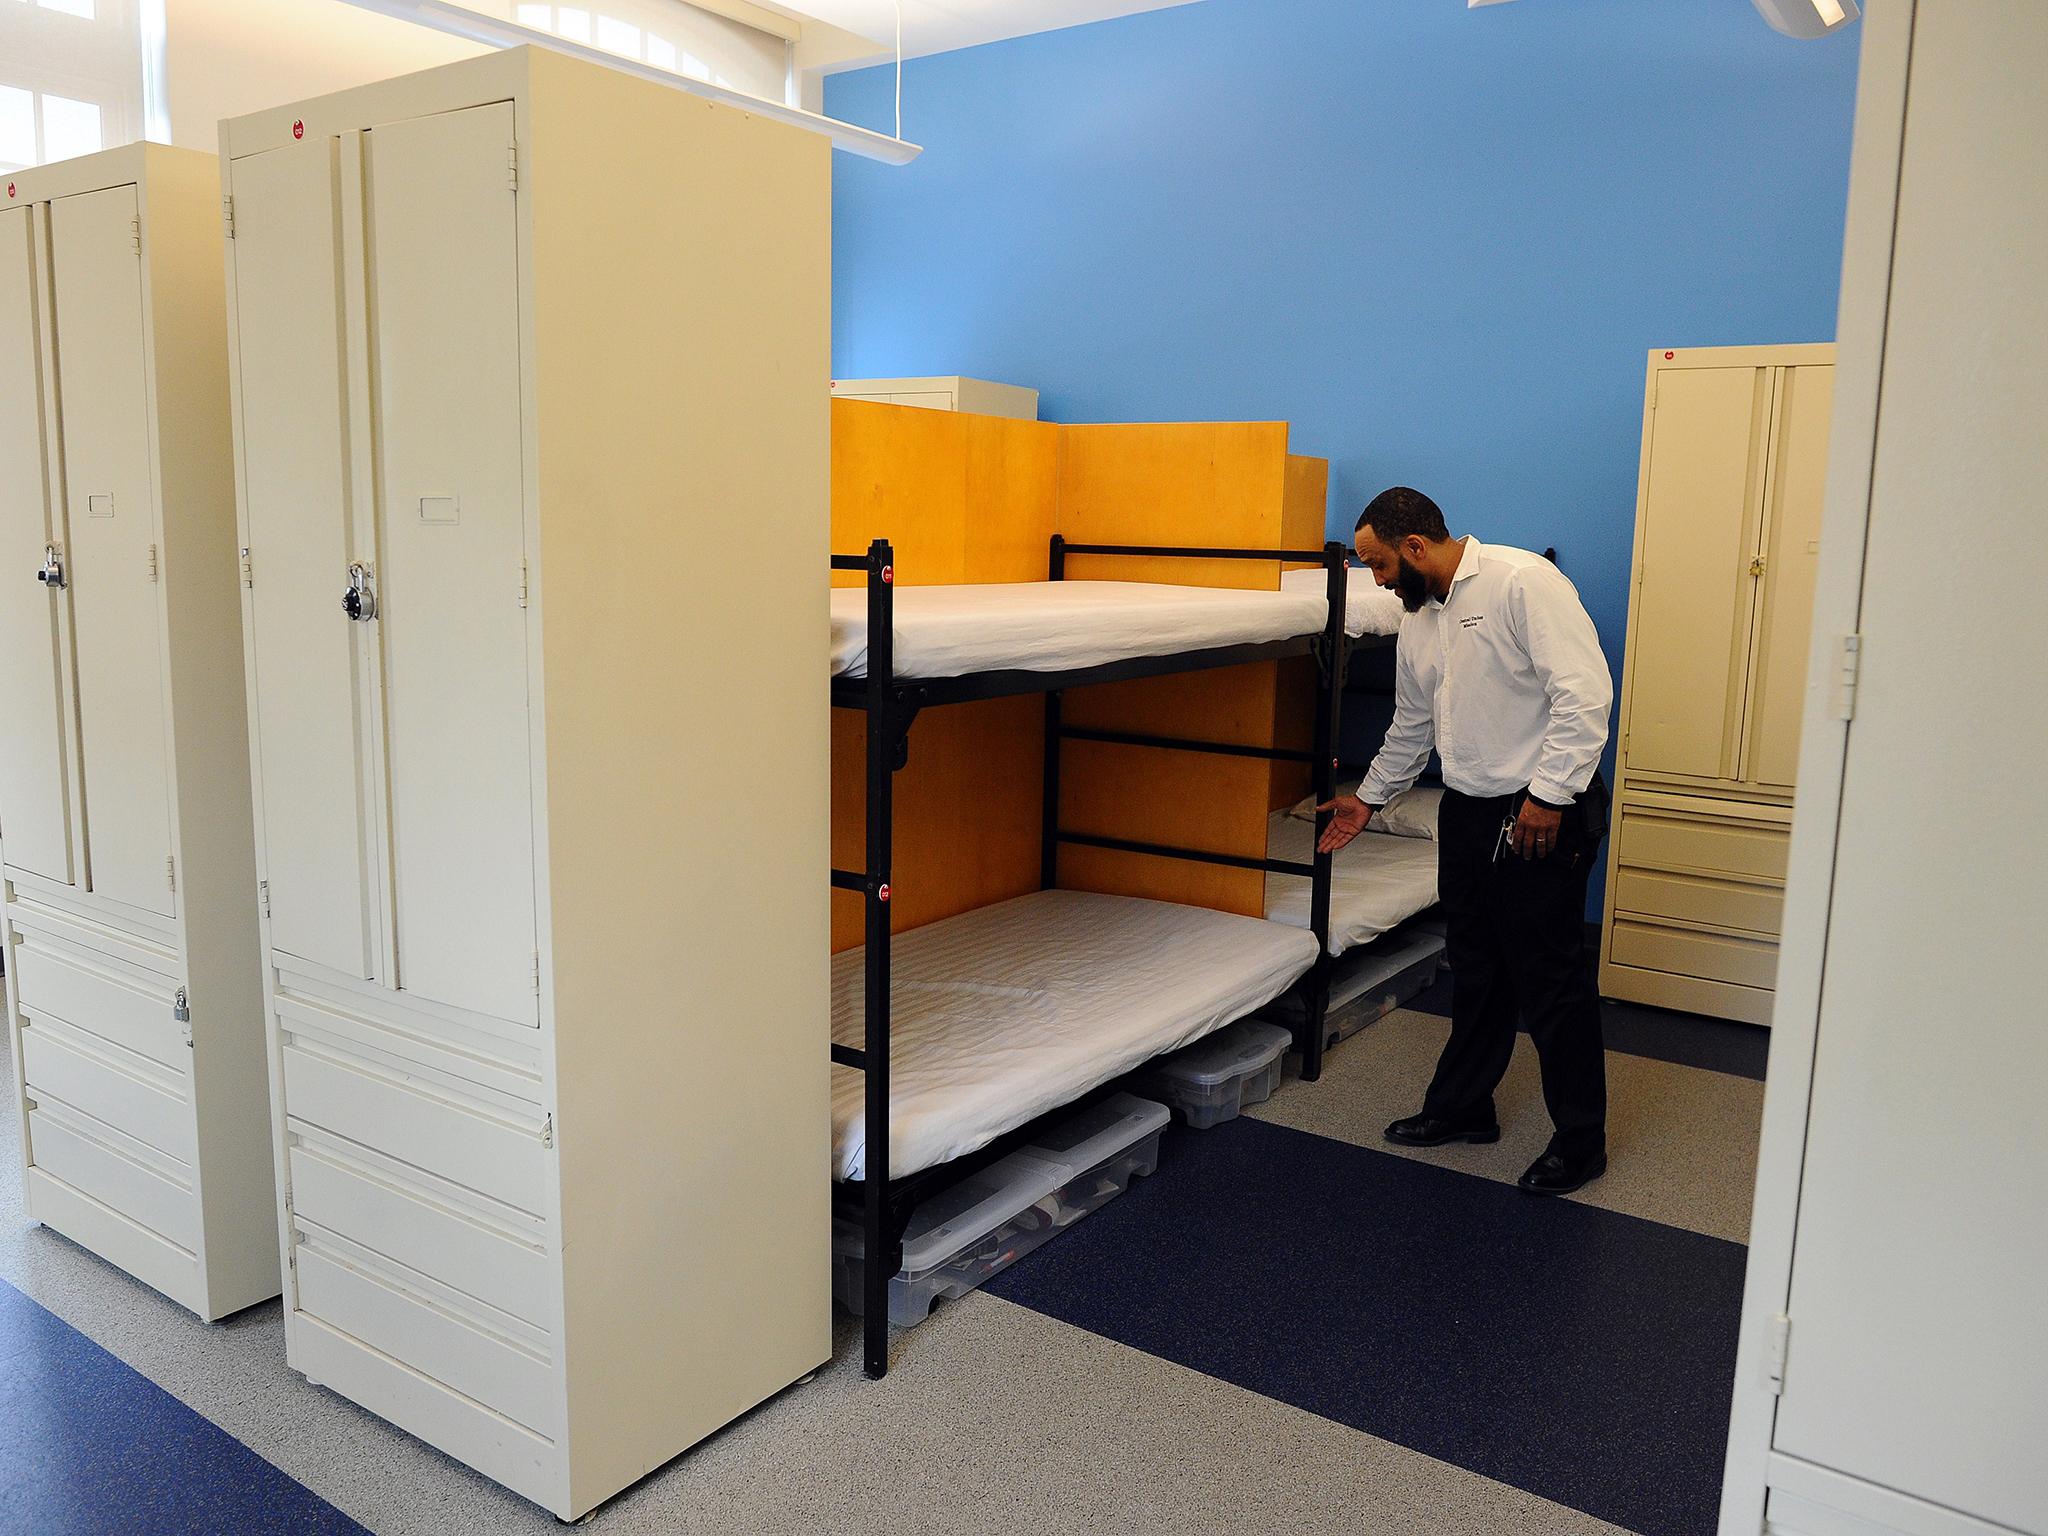 A homeless shelter opened in Washington DC in 2014